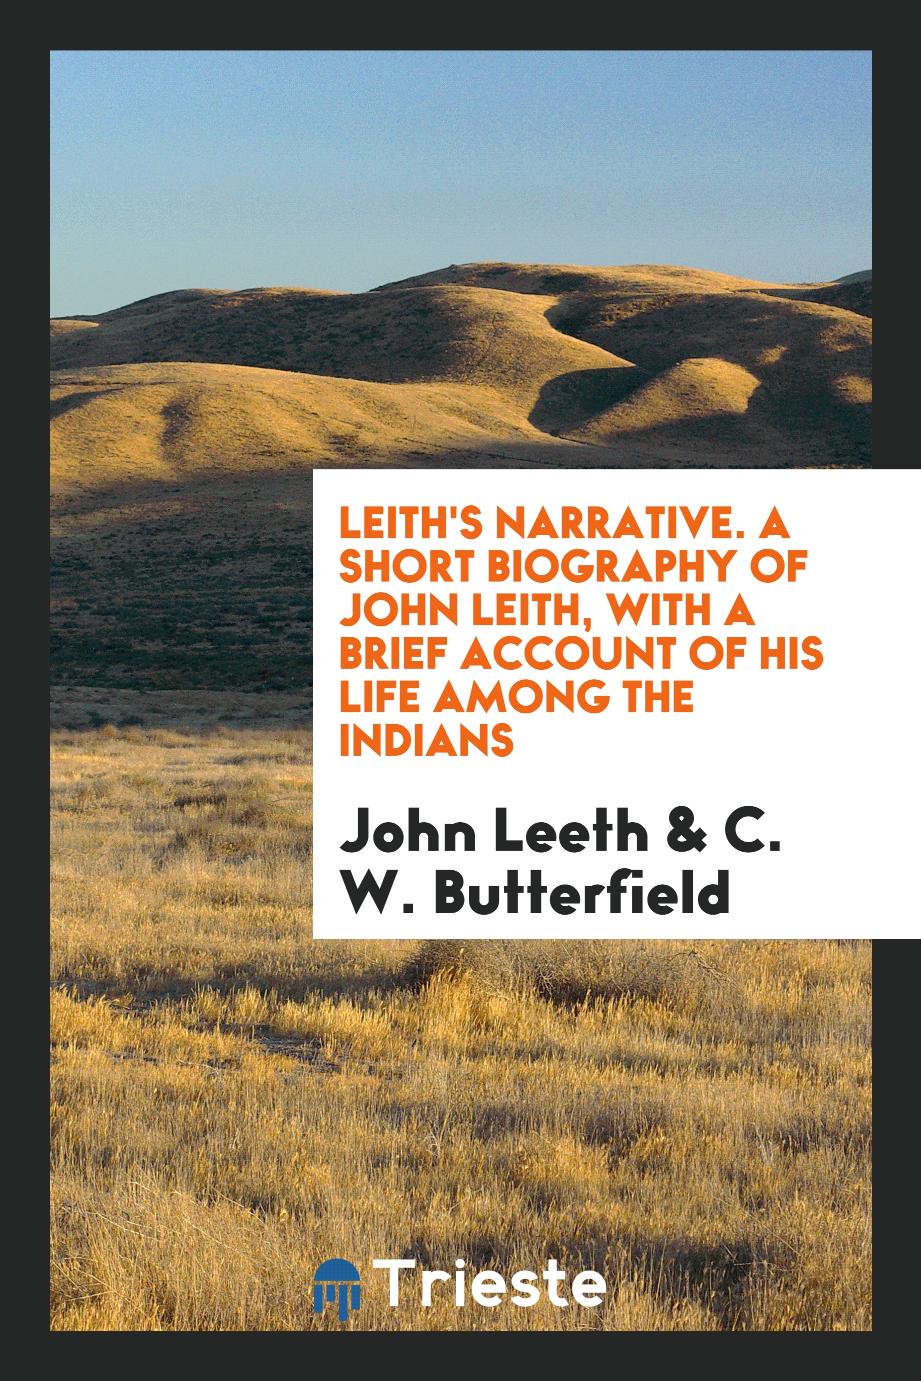 Leith's Narrative. A Short Biography of John Leith, with a Brief Account of His Life Among the Indians